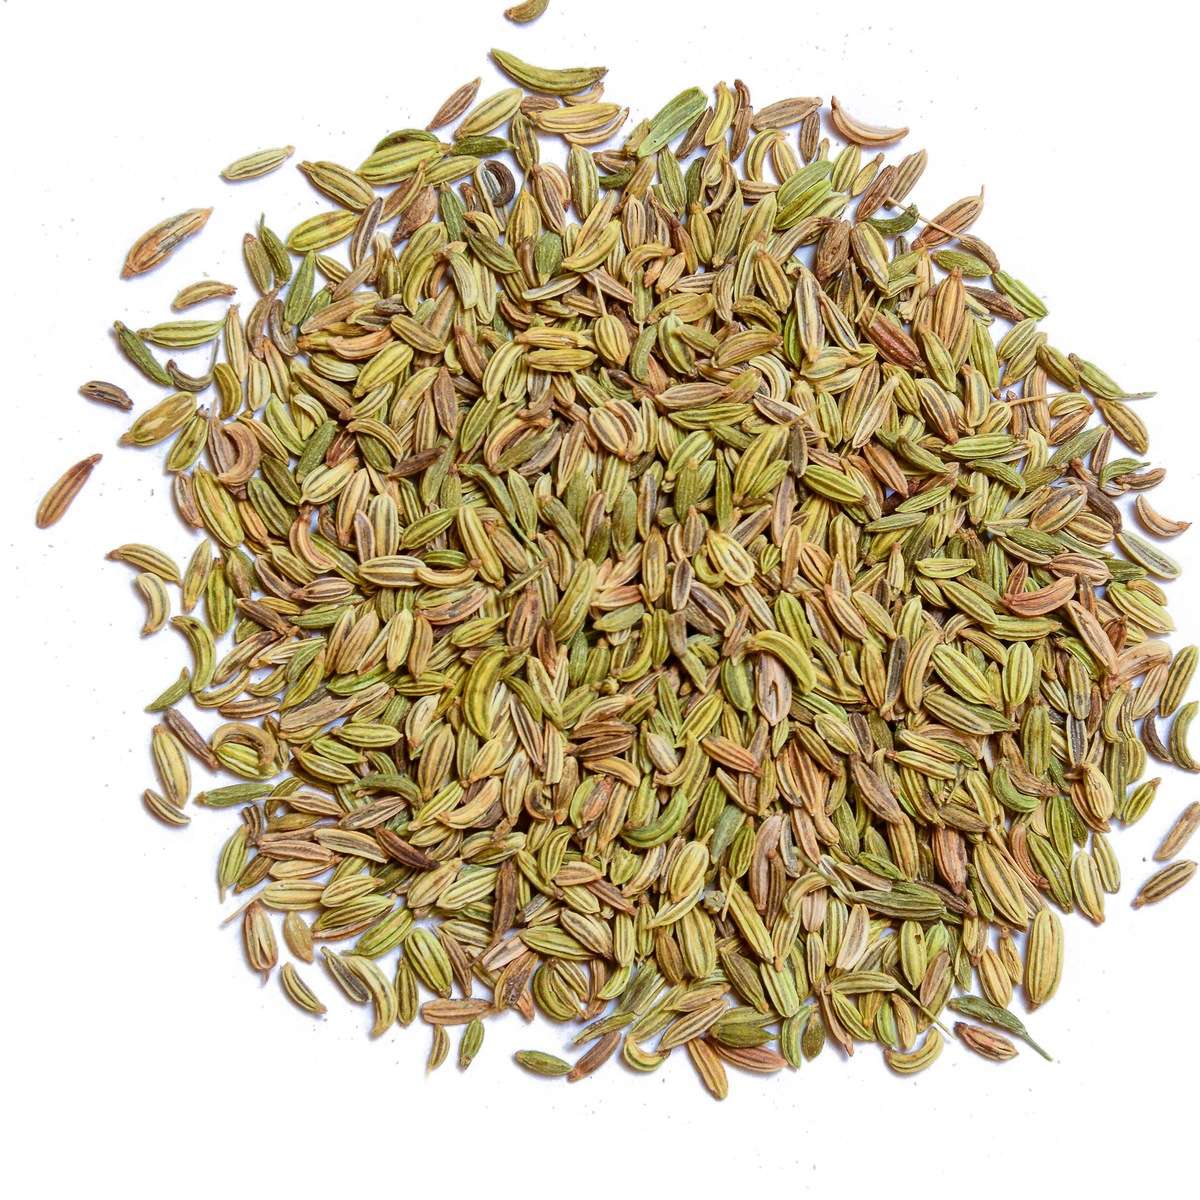 Fennel Seeds NZ | Fennel Herbs | Indian Spices SHowing nice big heap of the fennel seed